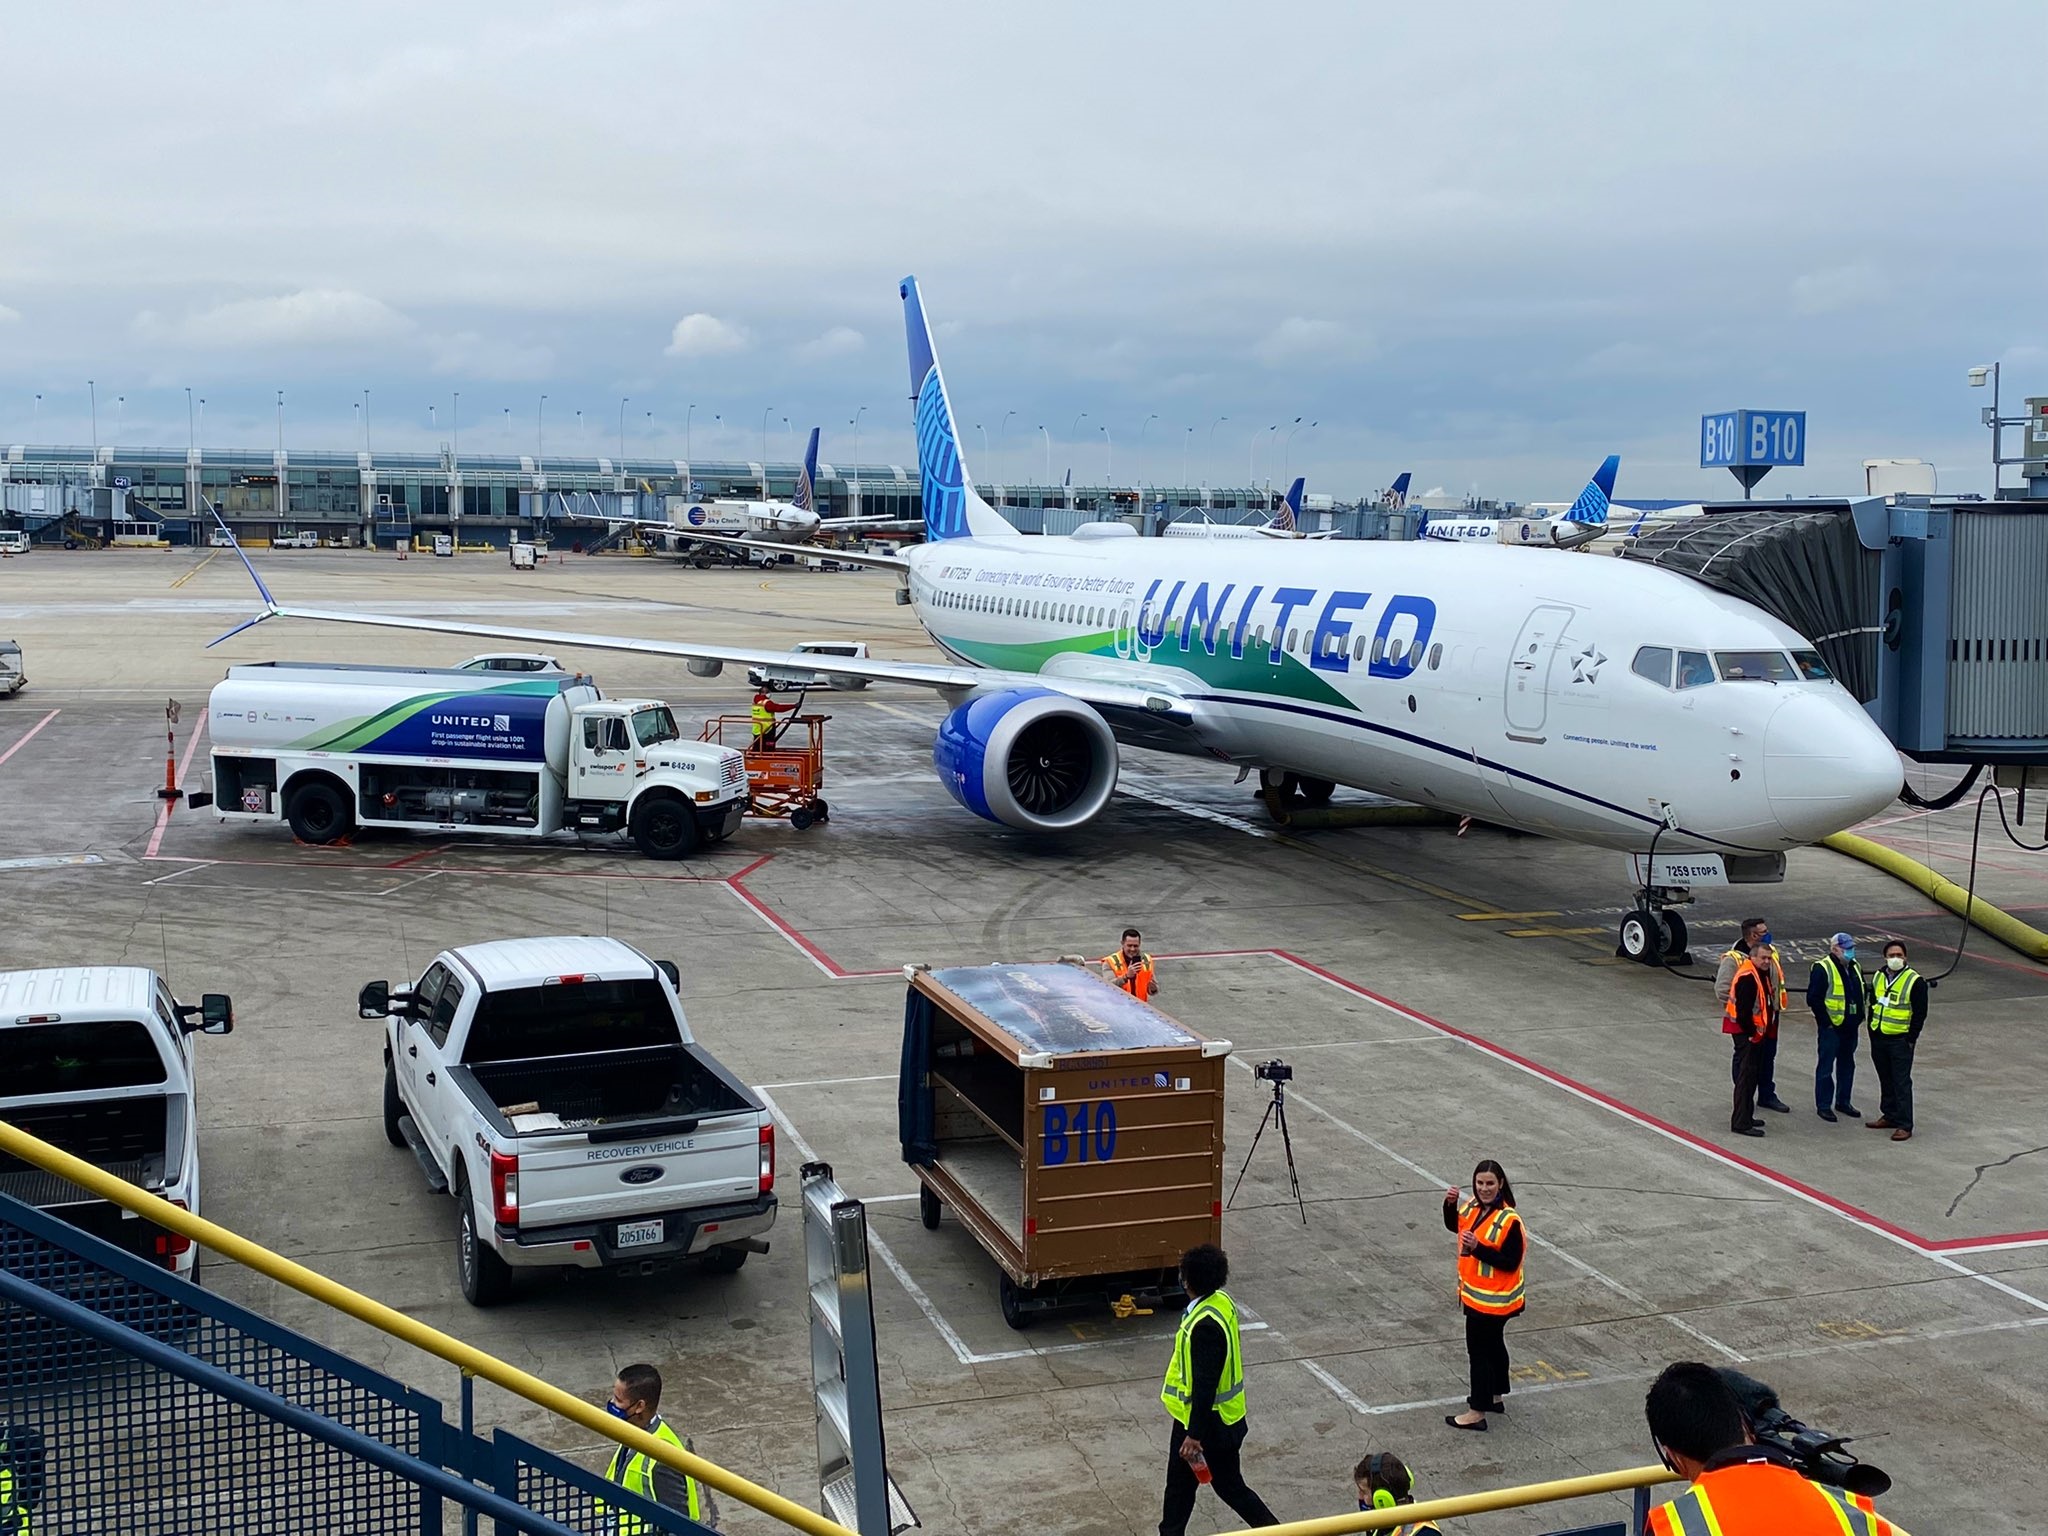 United To Fly World’s First Passenger Flight On 100% Sustainable Aviation Fuel Supplying One Of Its Engines !